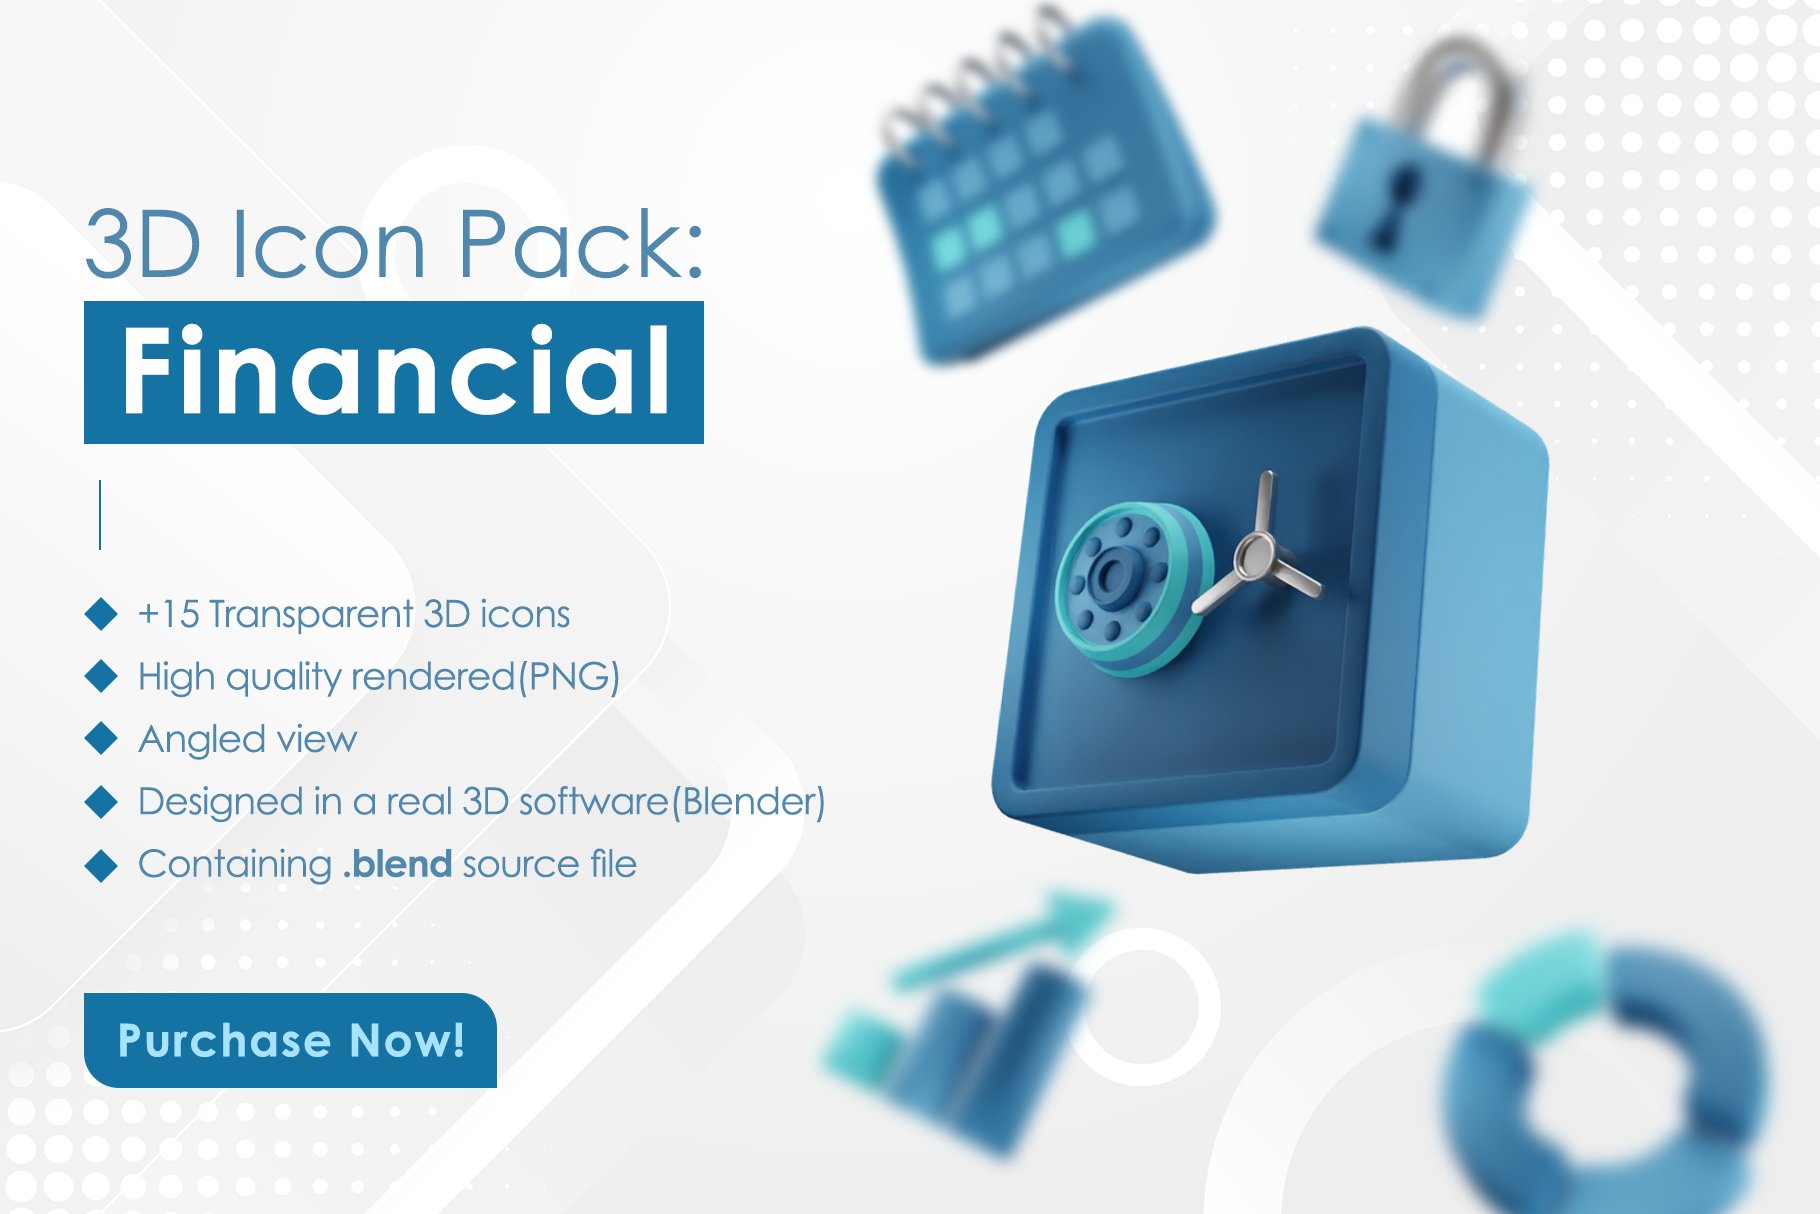 Financial 3D Icon Pack cover image.